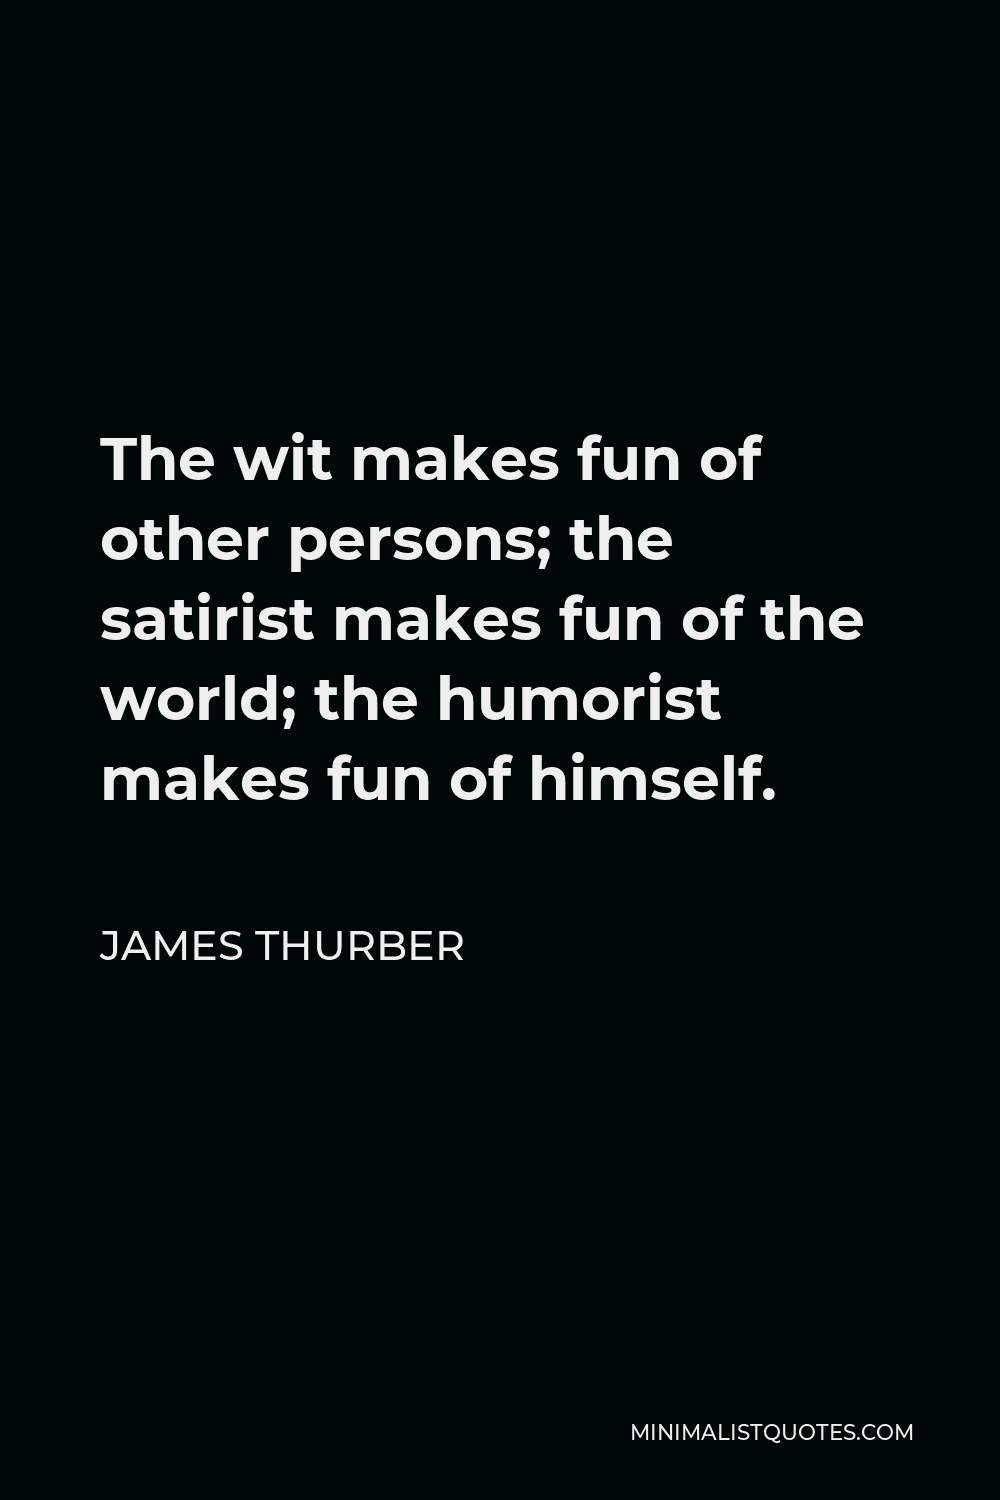 James Thurber Quote - The wit makes fun of other persons; the satirist makes fun of the world; the humorist makes fun of himself.